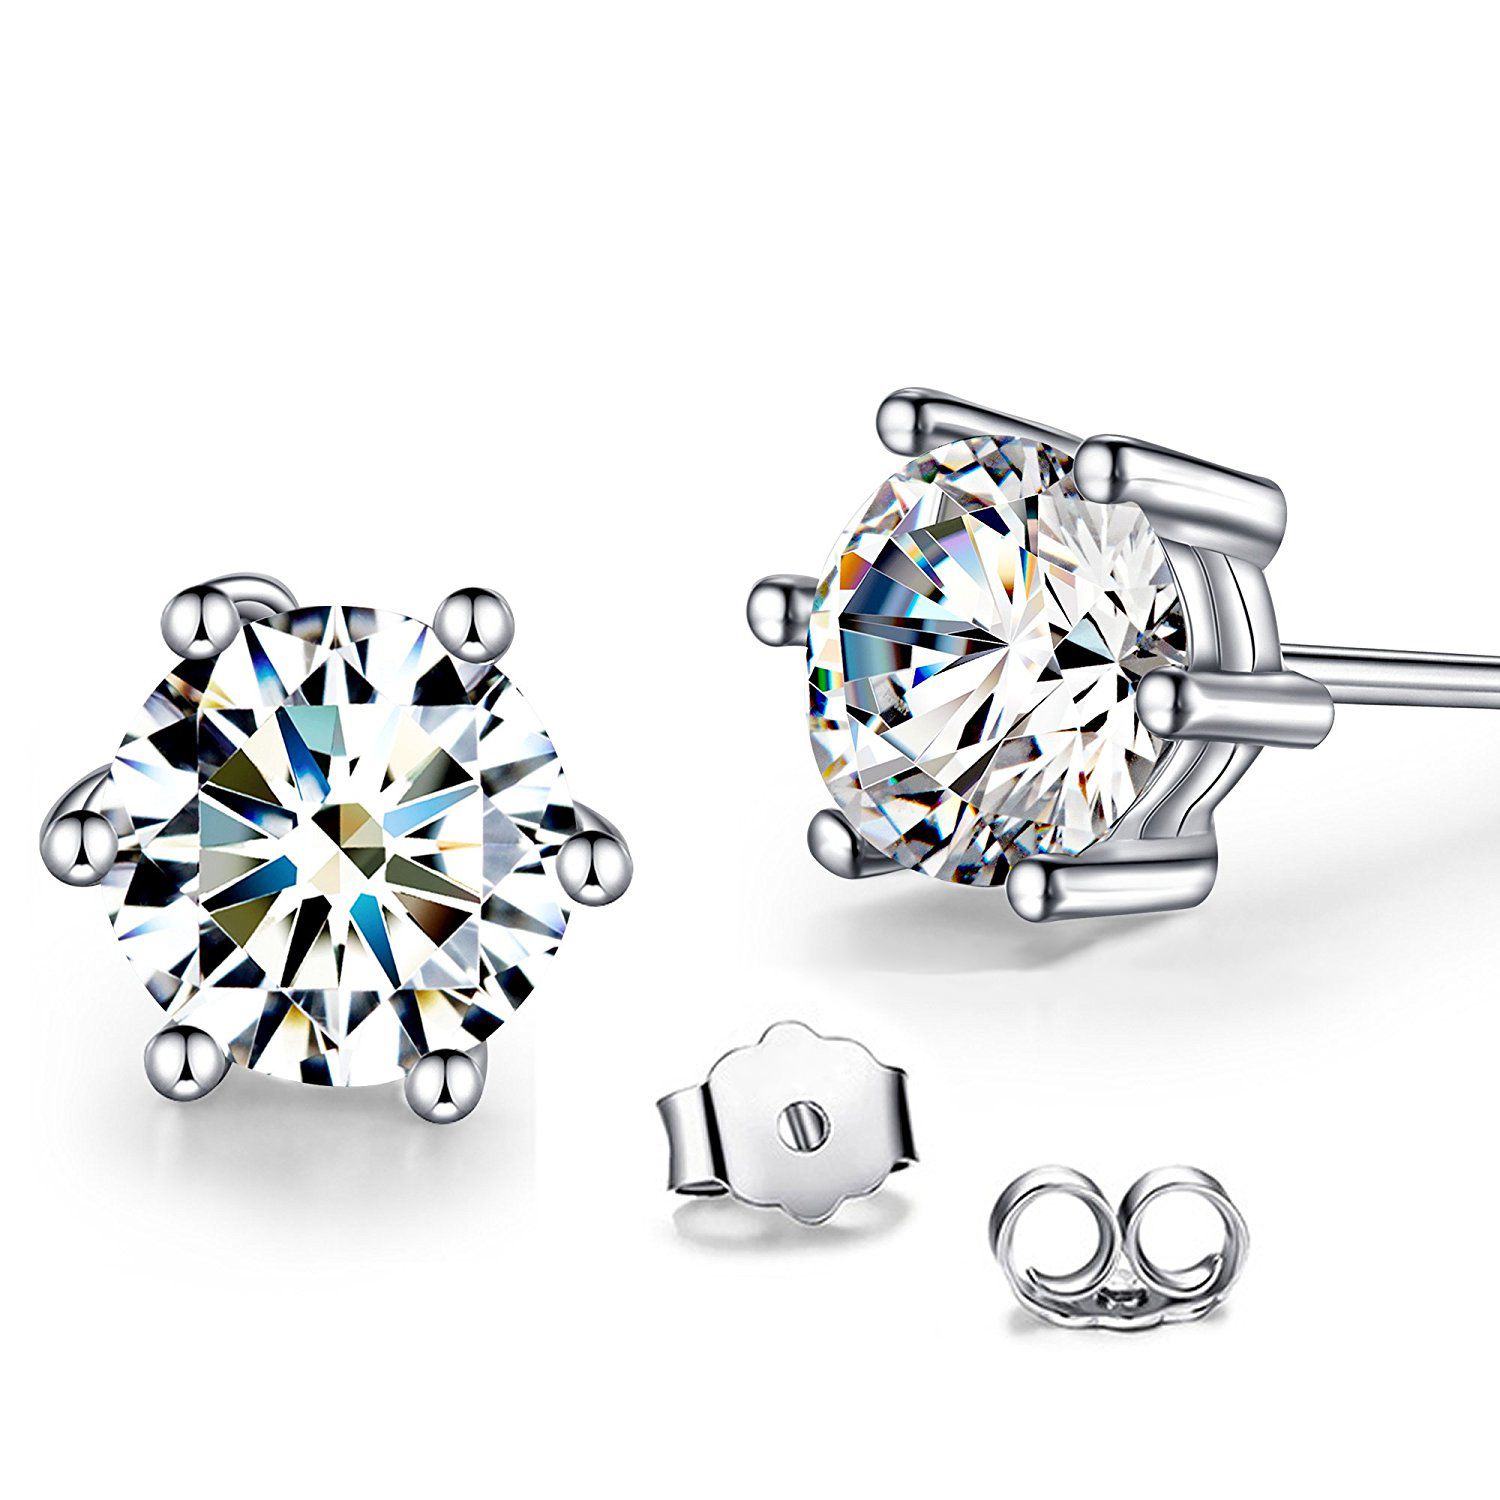     			The Jewelbox Solitaire 6 MM Round Cut CZ American Diamond 316L Surgical Stainless Steel Ear Stud Pair Earring Men Women